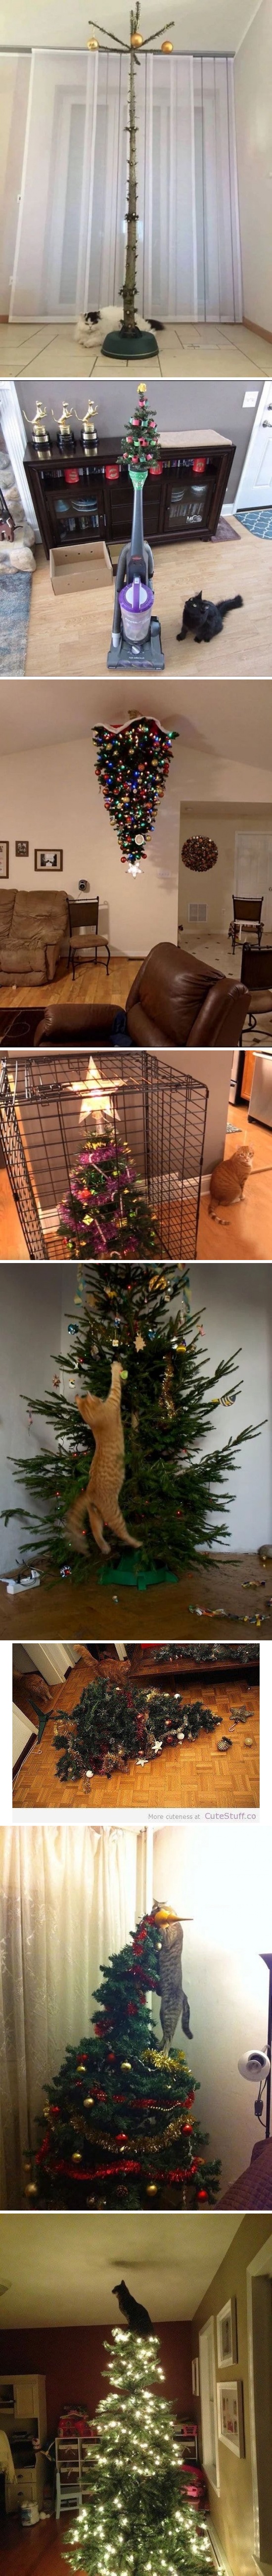 A Christmas tree at a cat's house.jpg